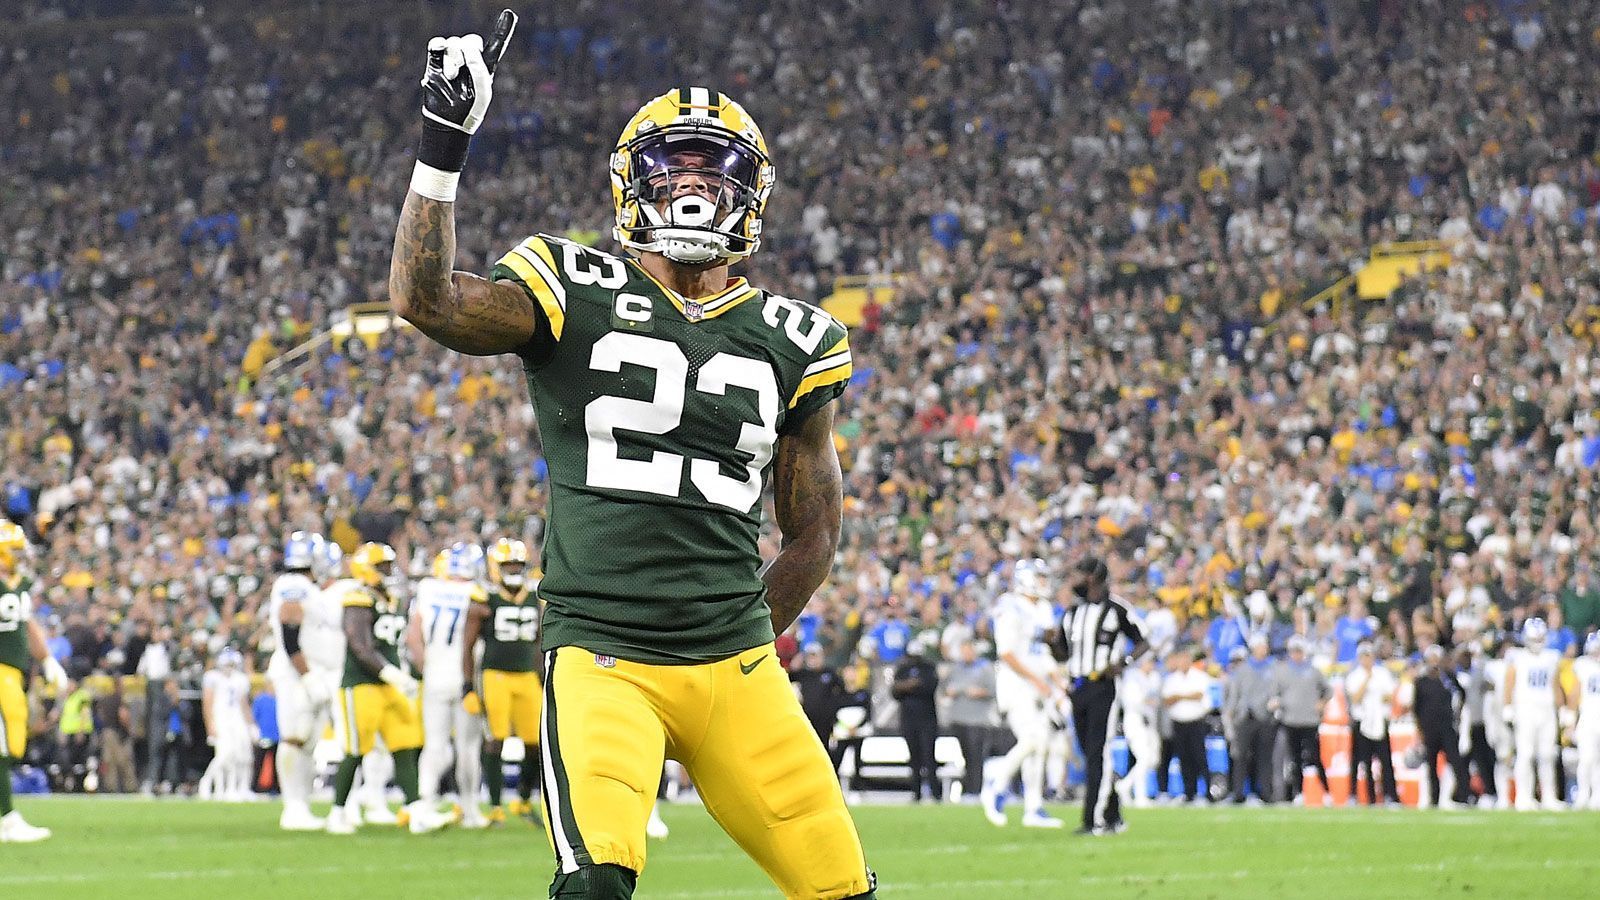 
                <strong>Platz 2: Jaire Alexander</strong><br>
                &#x2022; Team: Green Bay Packers<br>&#x2022; <strong>Overall Rating: 94</strong><br>&#x2022; Key Stats: Acceleration: 93 – Awareness: 97 – Stamina: 93<br>
              